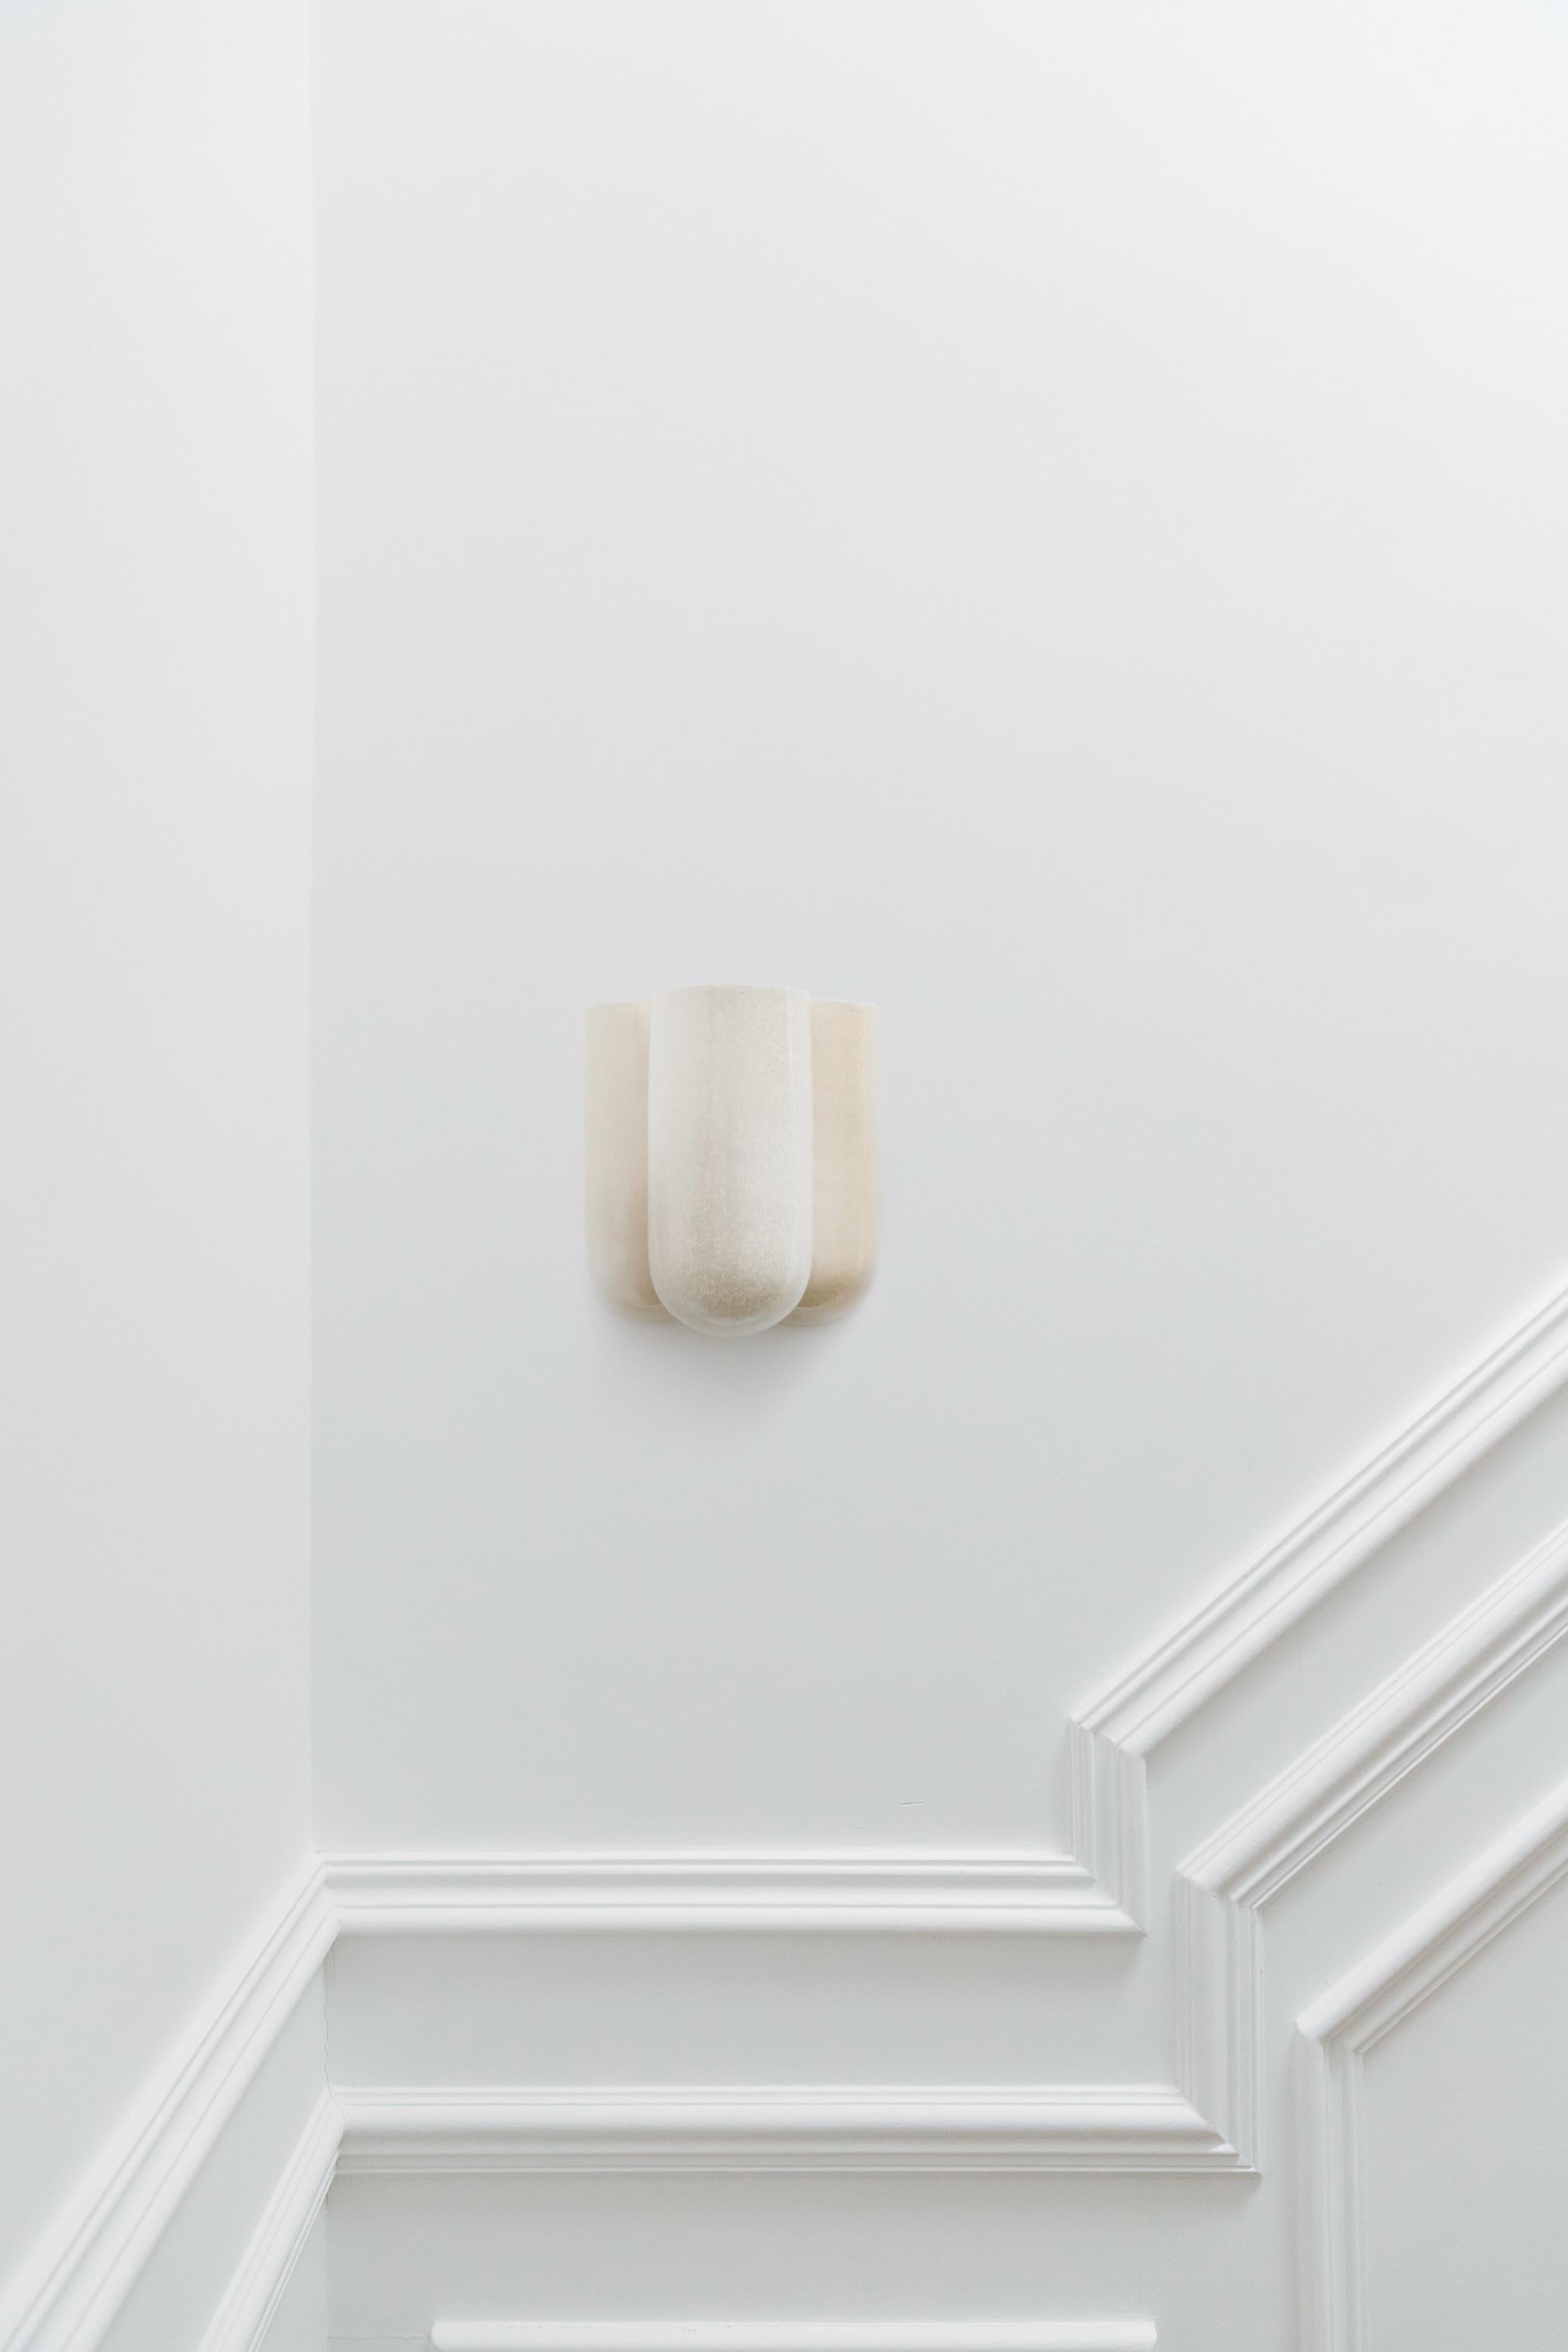 Other Pearl Plus Brillance Wall Light by Lisa Allegra